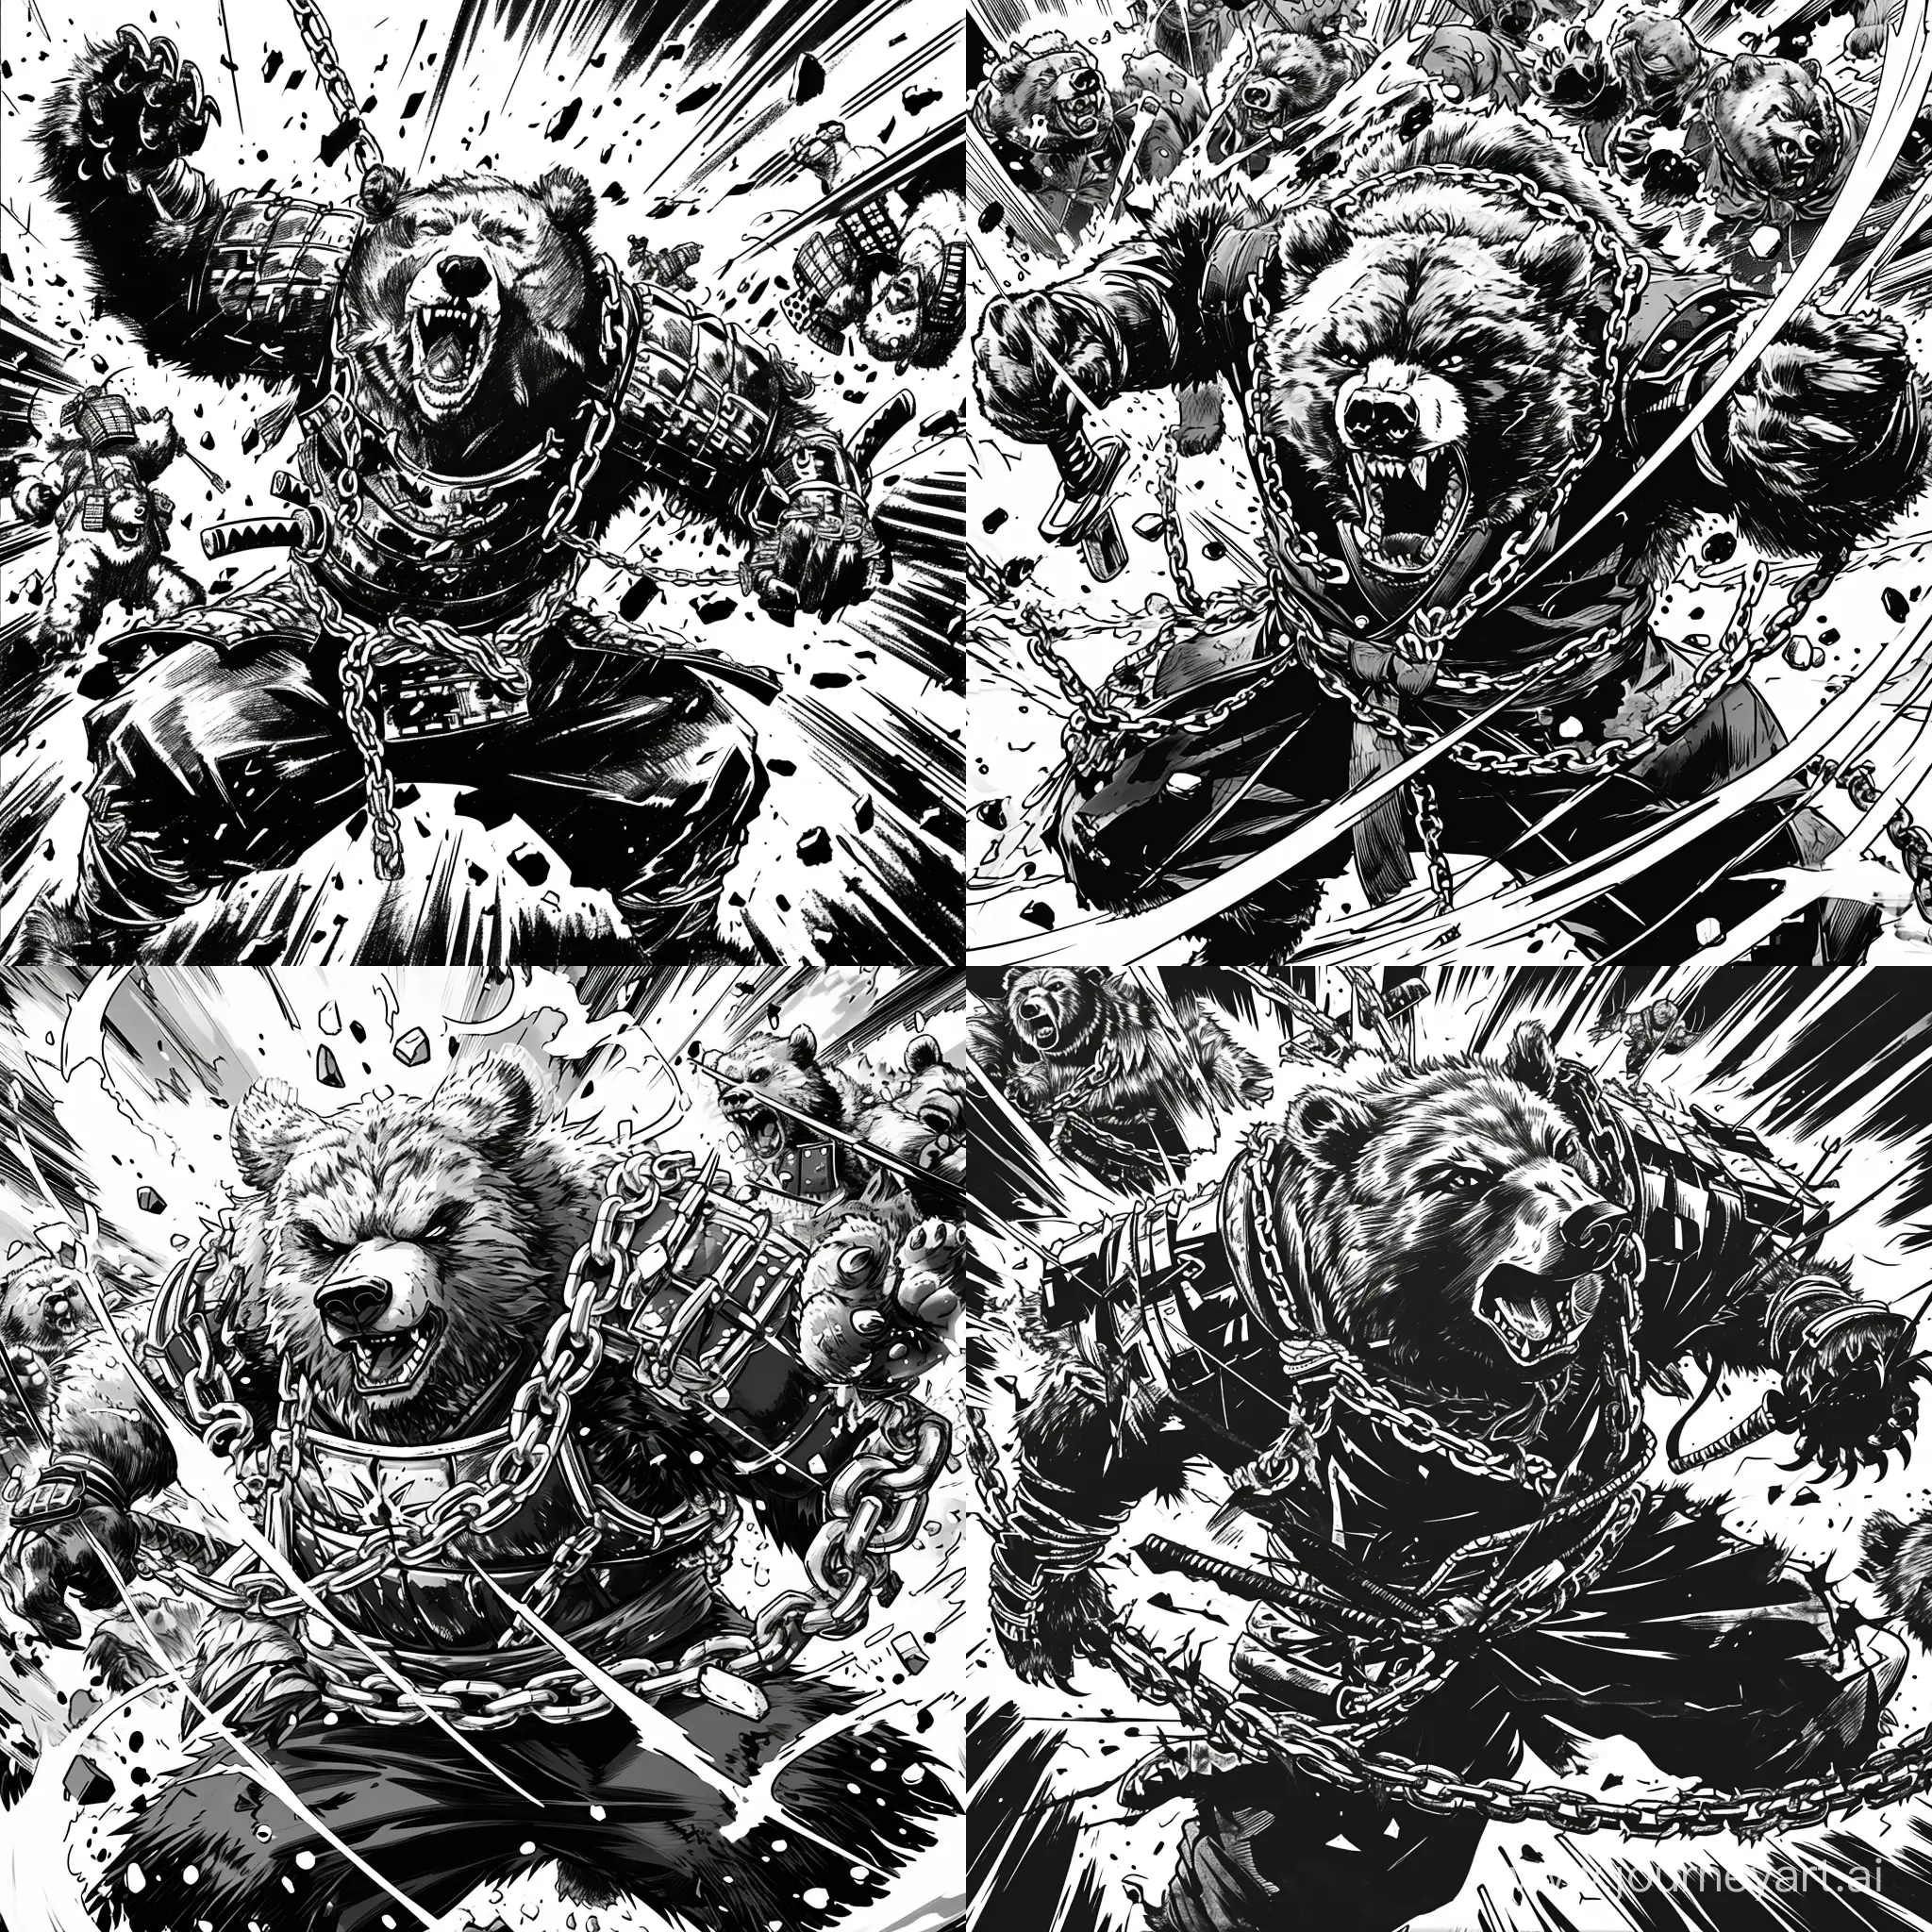 Create a dynamic black-and-white image in the style of a 90s Japanese shonen manga, showcasing an intense action scene where the central figure is a grizzly bear samurai adorned with chain armour. The bear samurai should strike a powerful pose and exemplify the classic attributes of samurai warriors, such as strength and honor. The background should be filled with other bear characters in the midst of combat, enhancing the feeling of movement and drama. The artwork should feature intricate and stylized linework, sharp contrasts, and dynamic manga-style action effects like speed lines and emotive intensity, capturing the distinct shonen manga style of the 90s.

